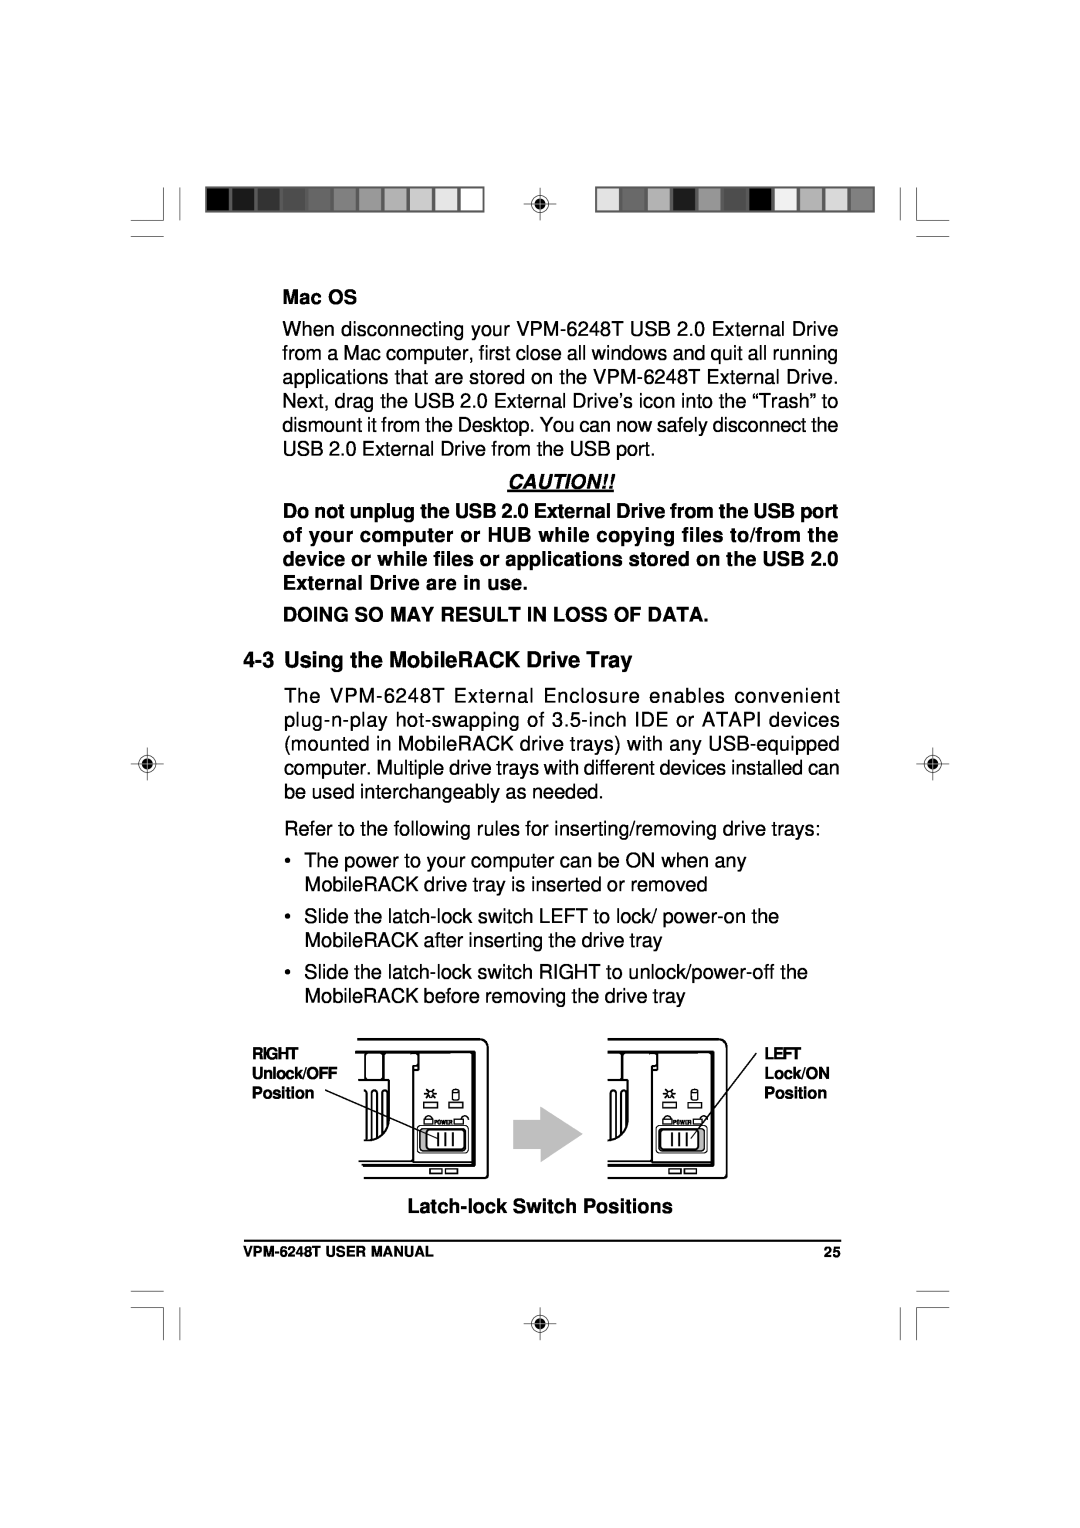 VIPowER VPM-6248T user manual Using the MobileRACK Drive Tray, Mac OS, Doing So May Result In Loss Of Data 